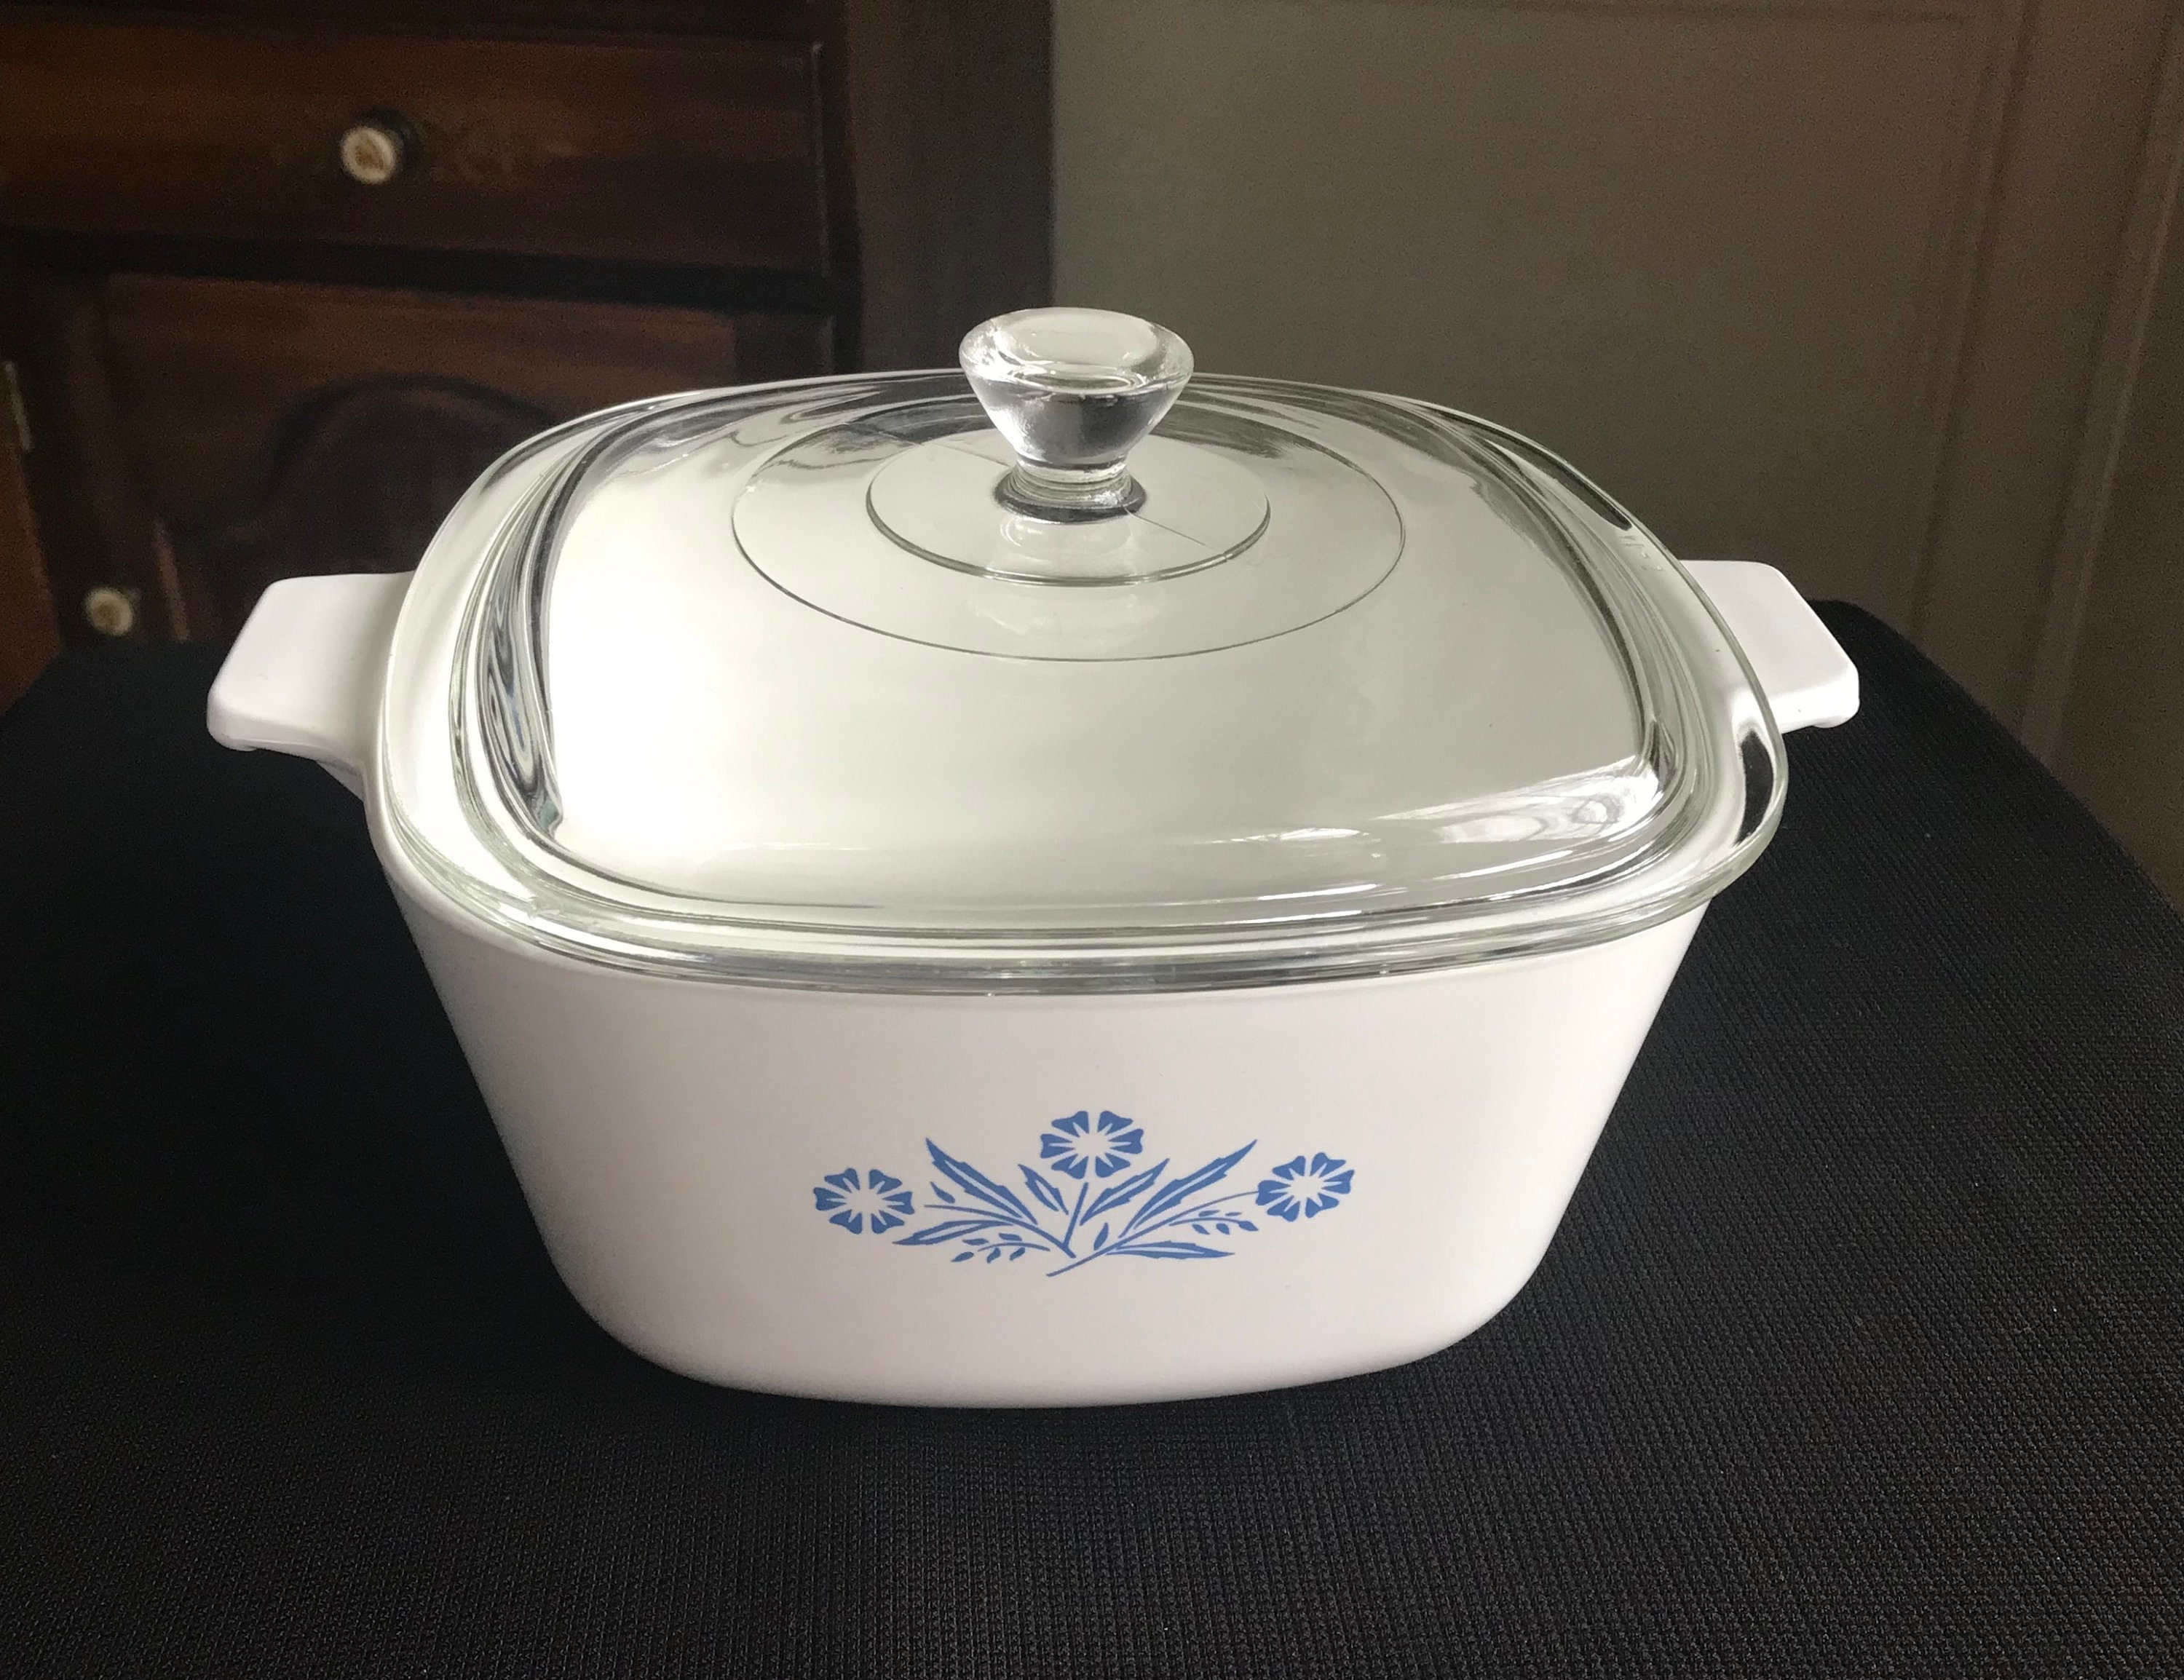 Cornflower Blue 3 Quart Square Casserole with Lid by Corning